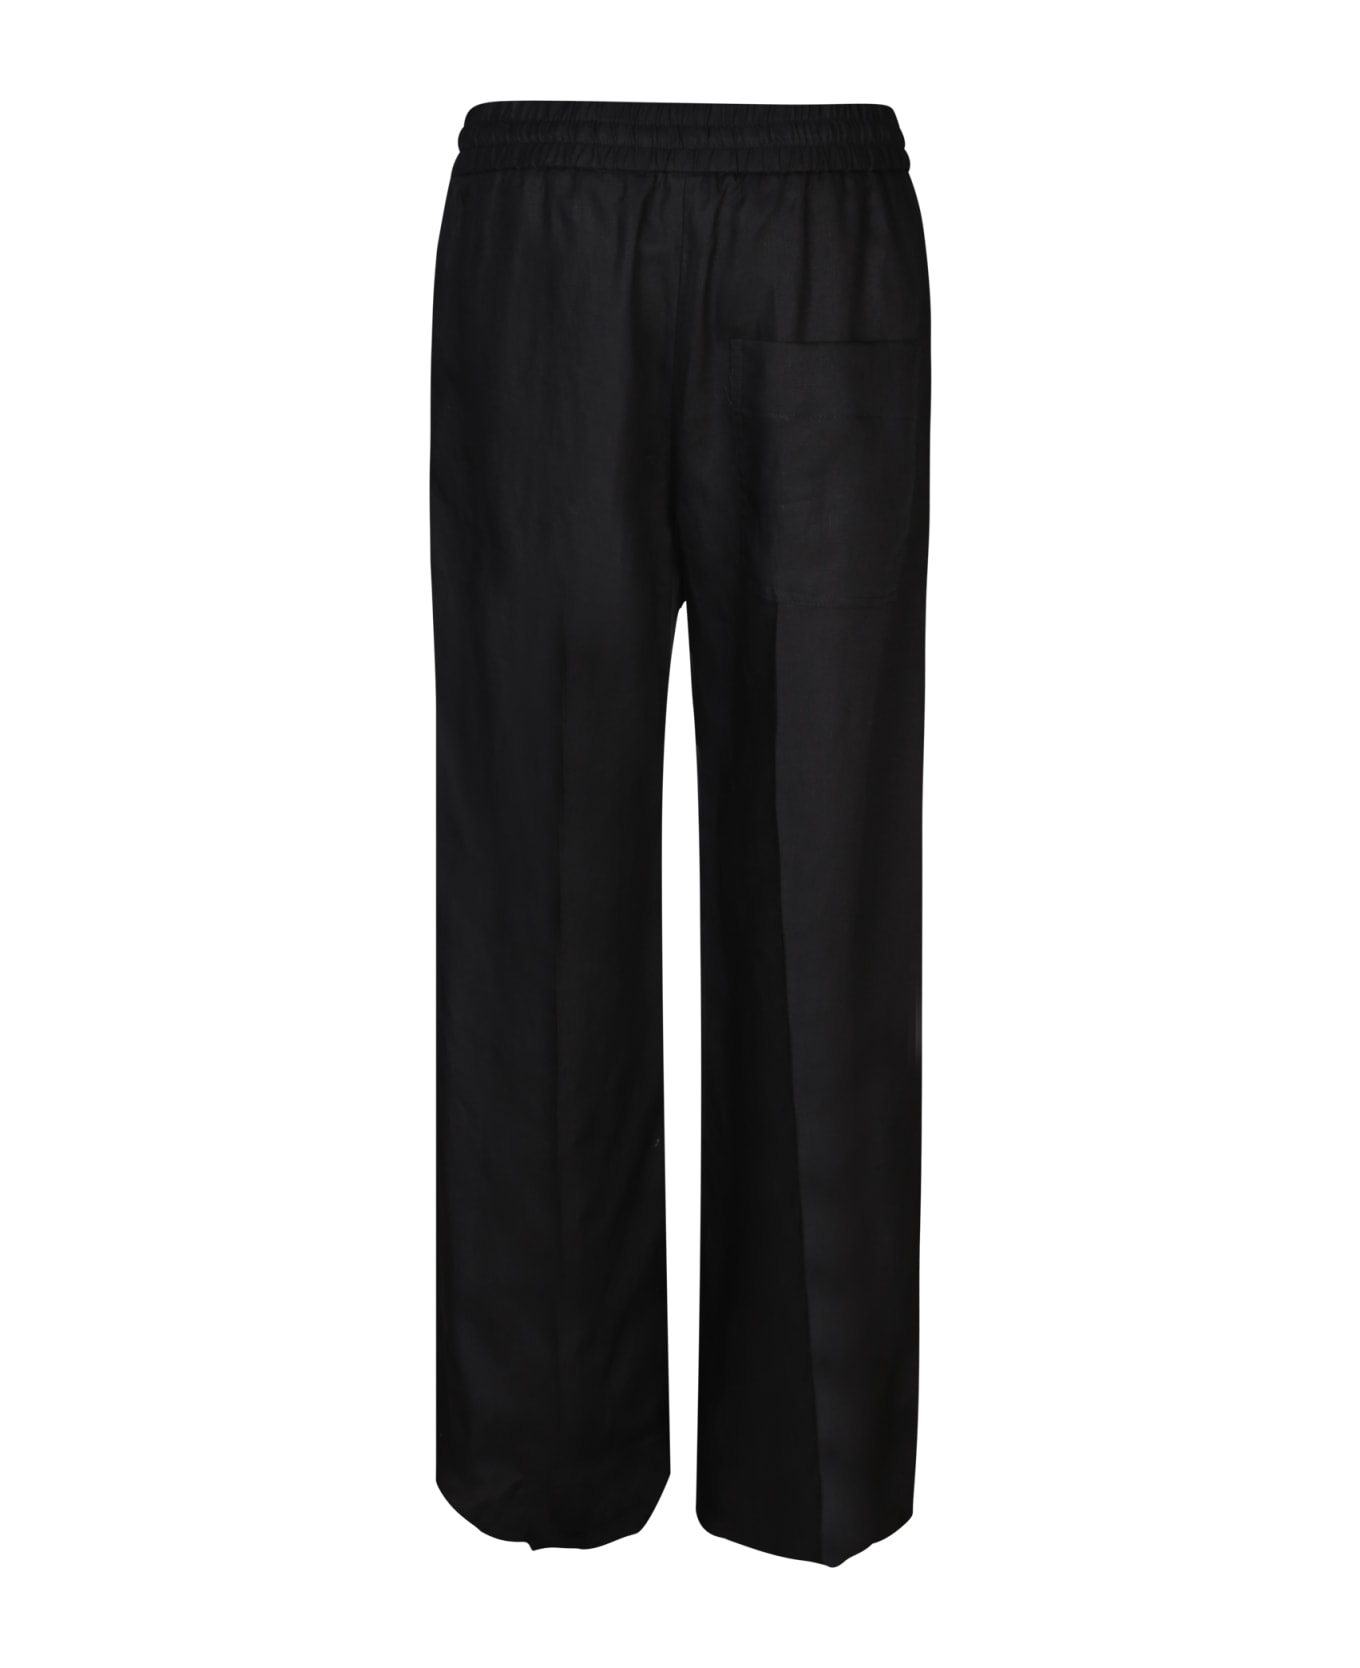 Paul Smith Wide-fit Black Trousers - Black ボトムス